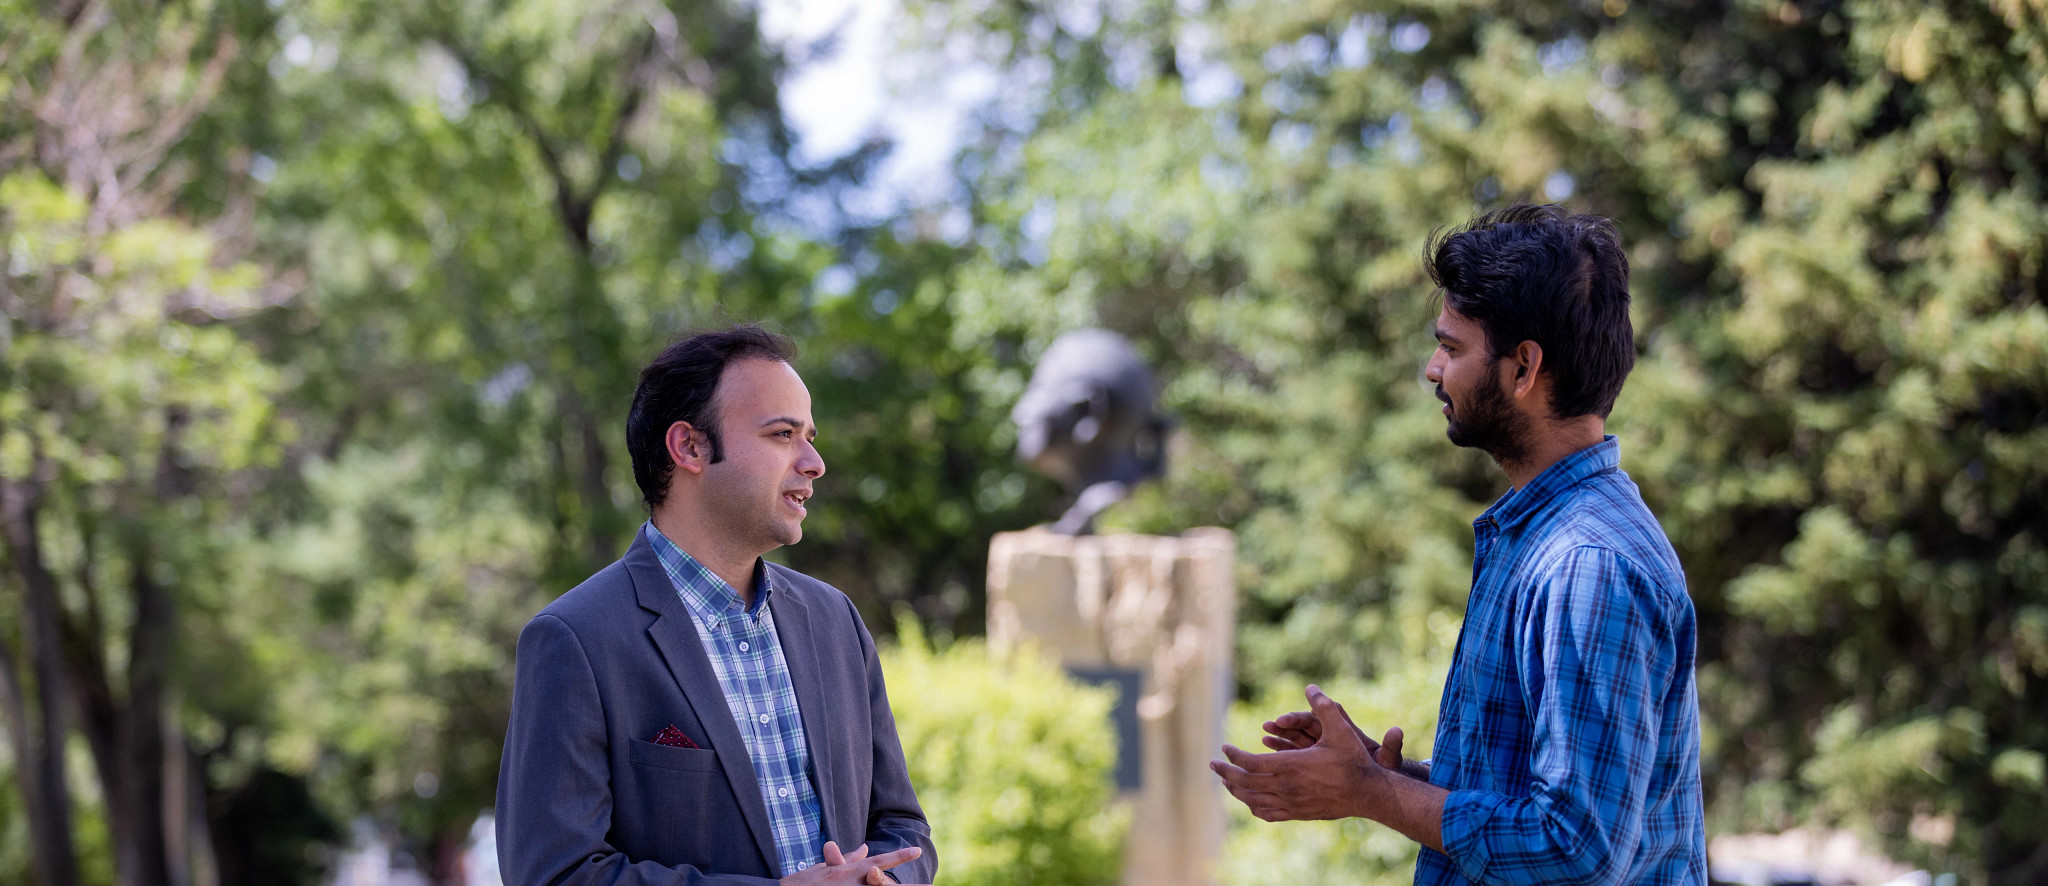 Ragh Singh and student talking outside on NAU's campus.